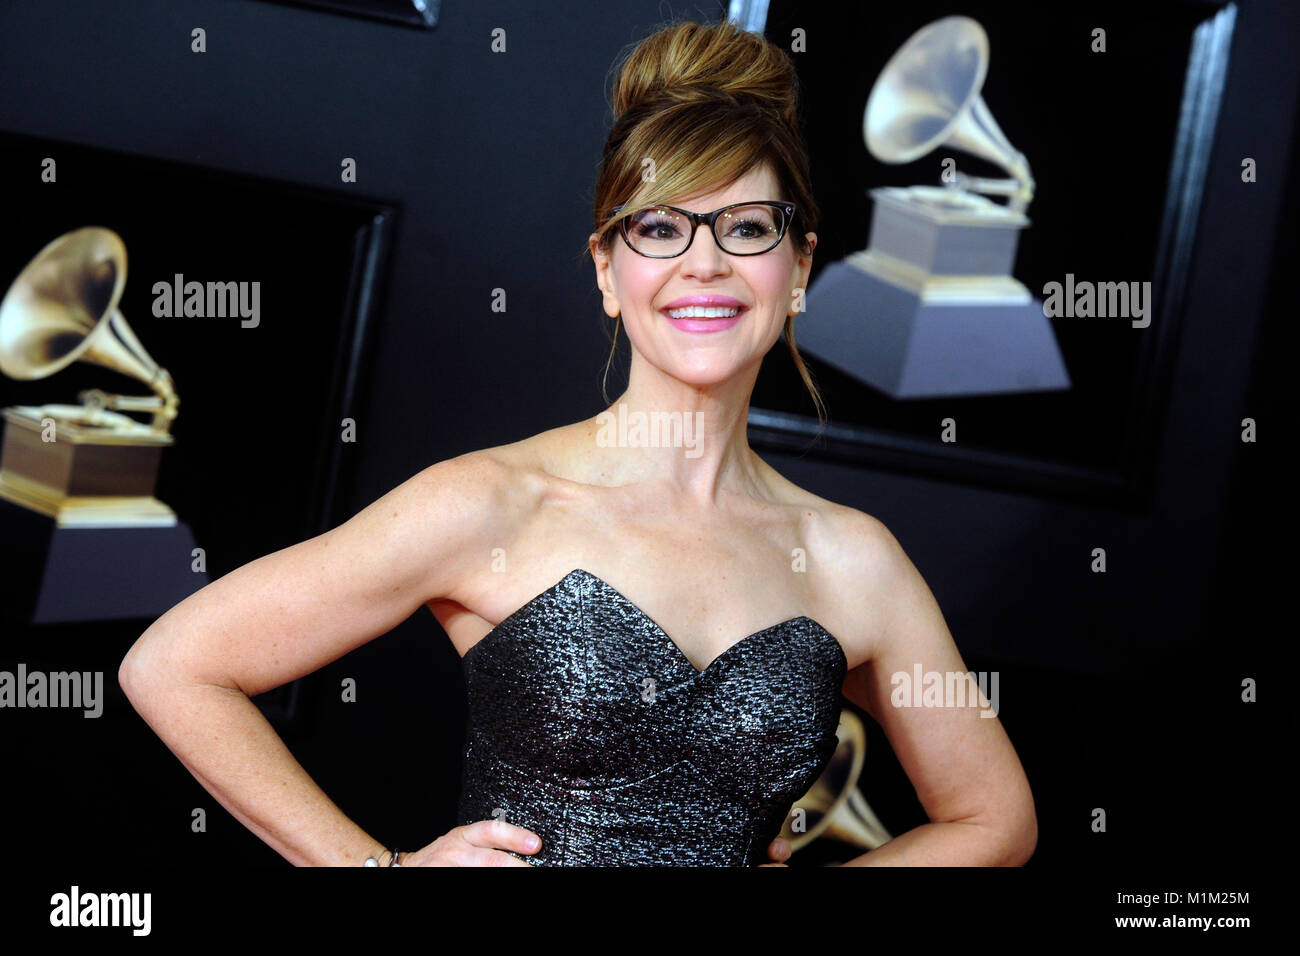 Lisa Loeb attends the 60th Annual Grammy Awards 2018 at Madison Square Garden on January 28, 2018 in New York City. Stock Photo